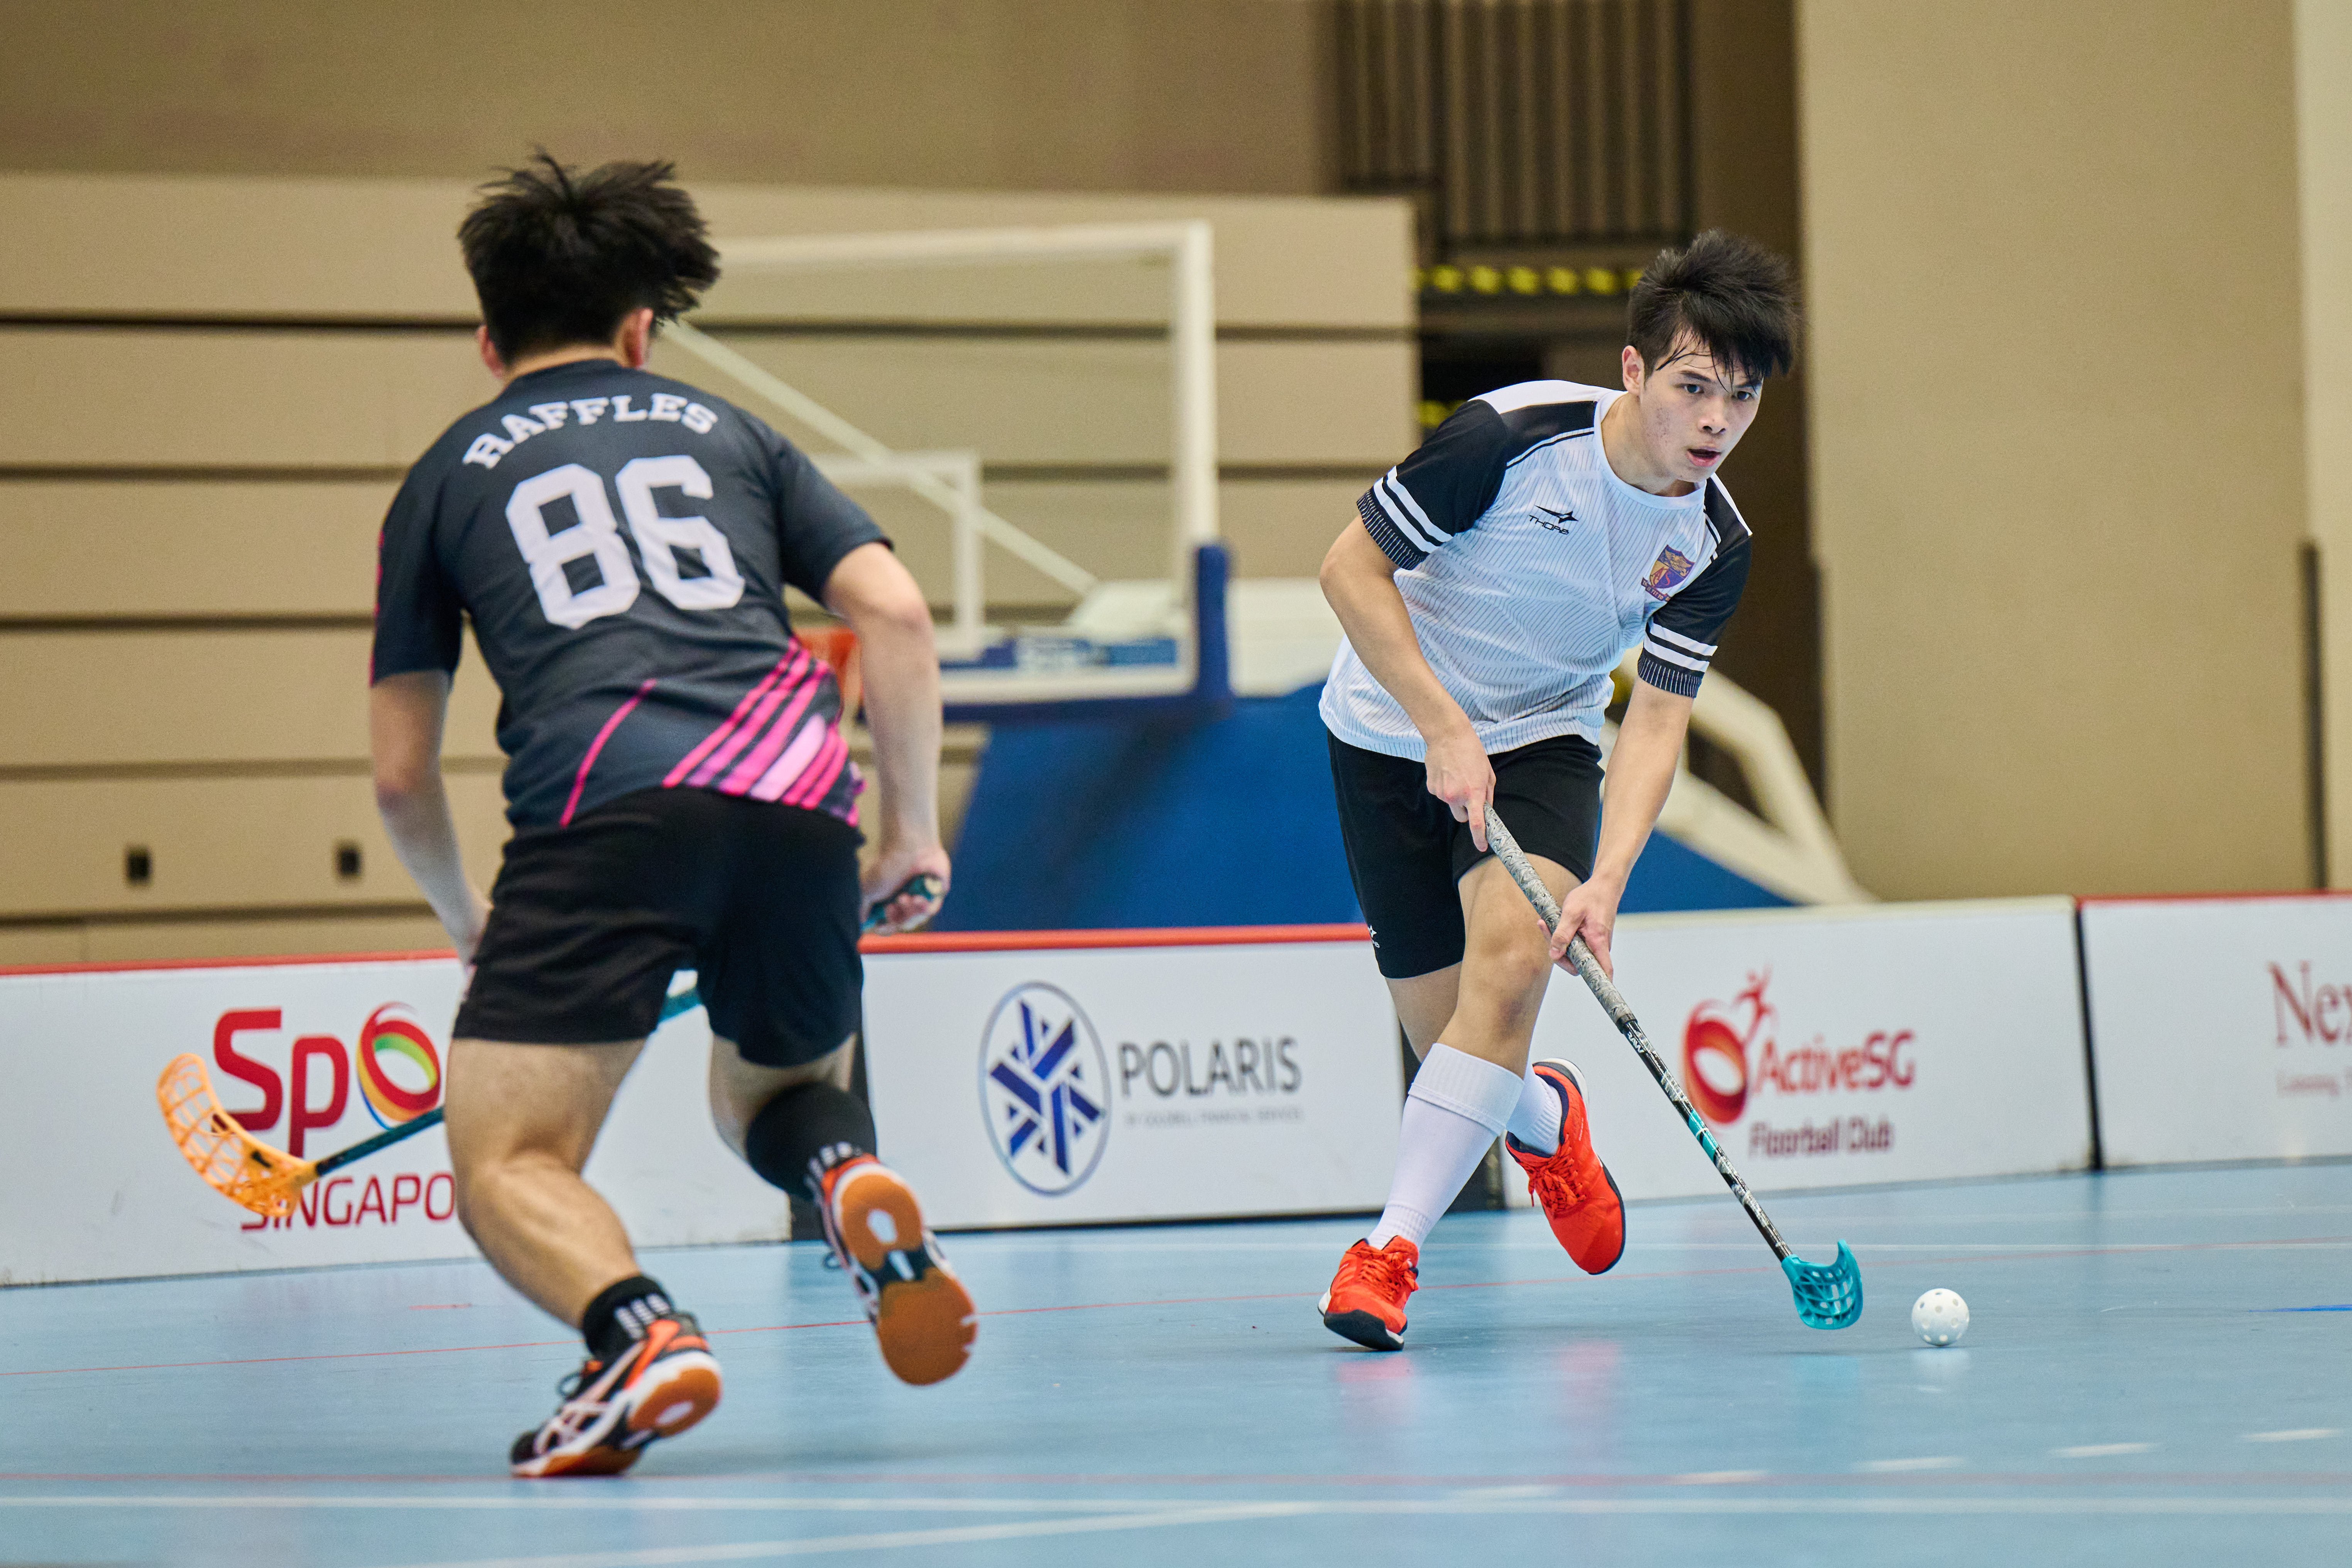 20220519_20220519 SSSC Floorball National A Div Boys Semi Finals Raffles Junior College Vs Anglo-Chinese Junior College_Siaw Woon Chong_0020